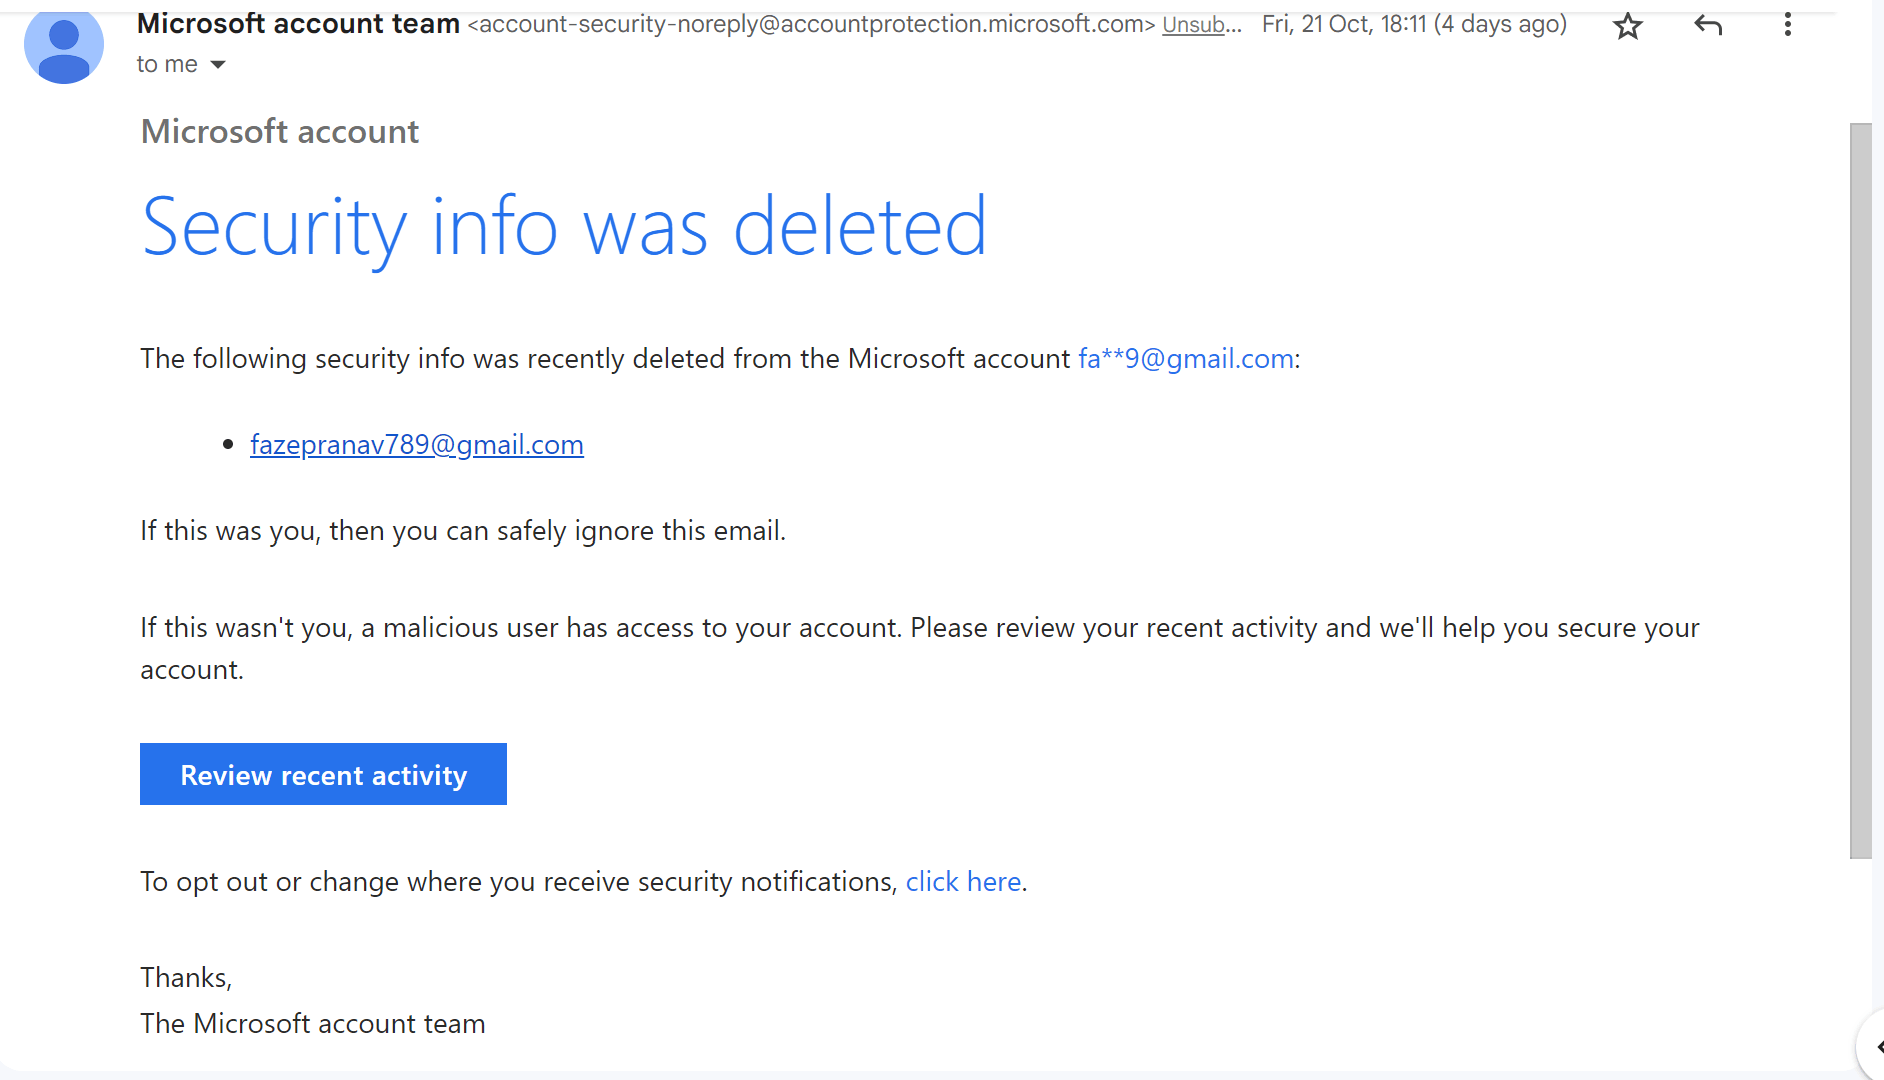 My Minecraft Account Was Getting Hacked. - Microsoft Community